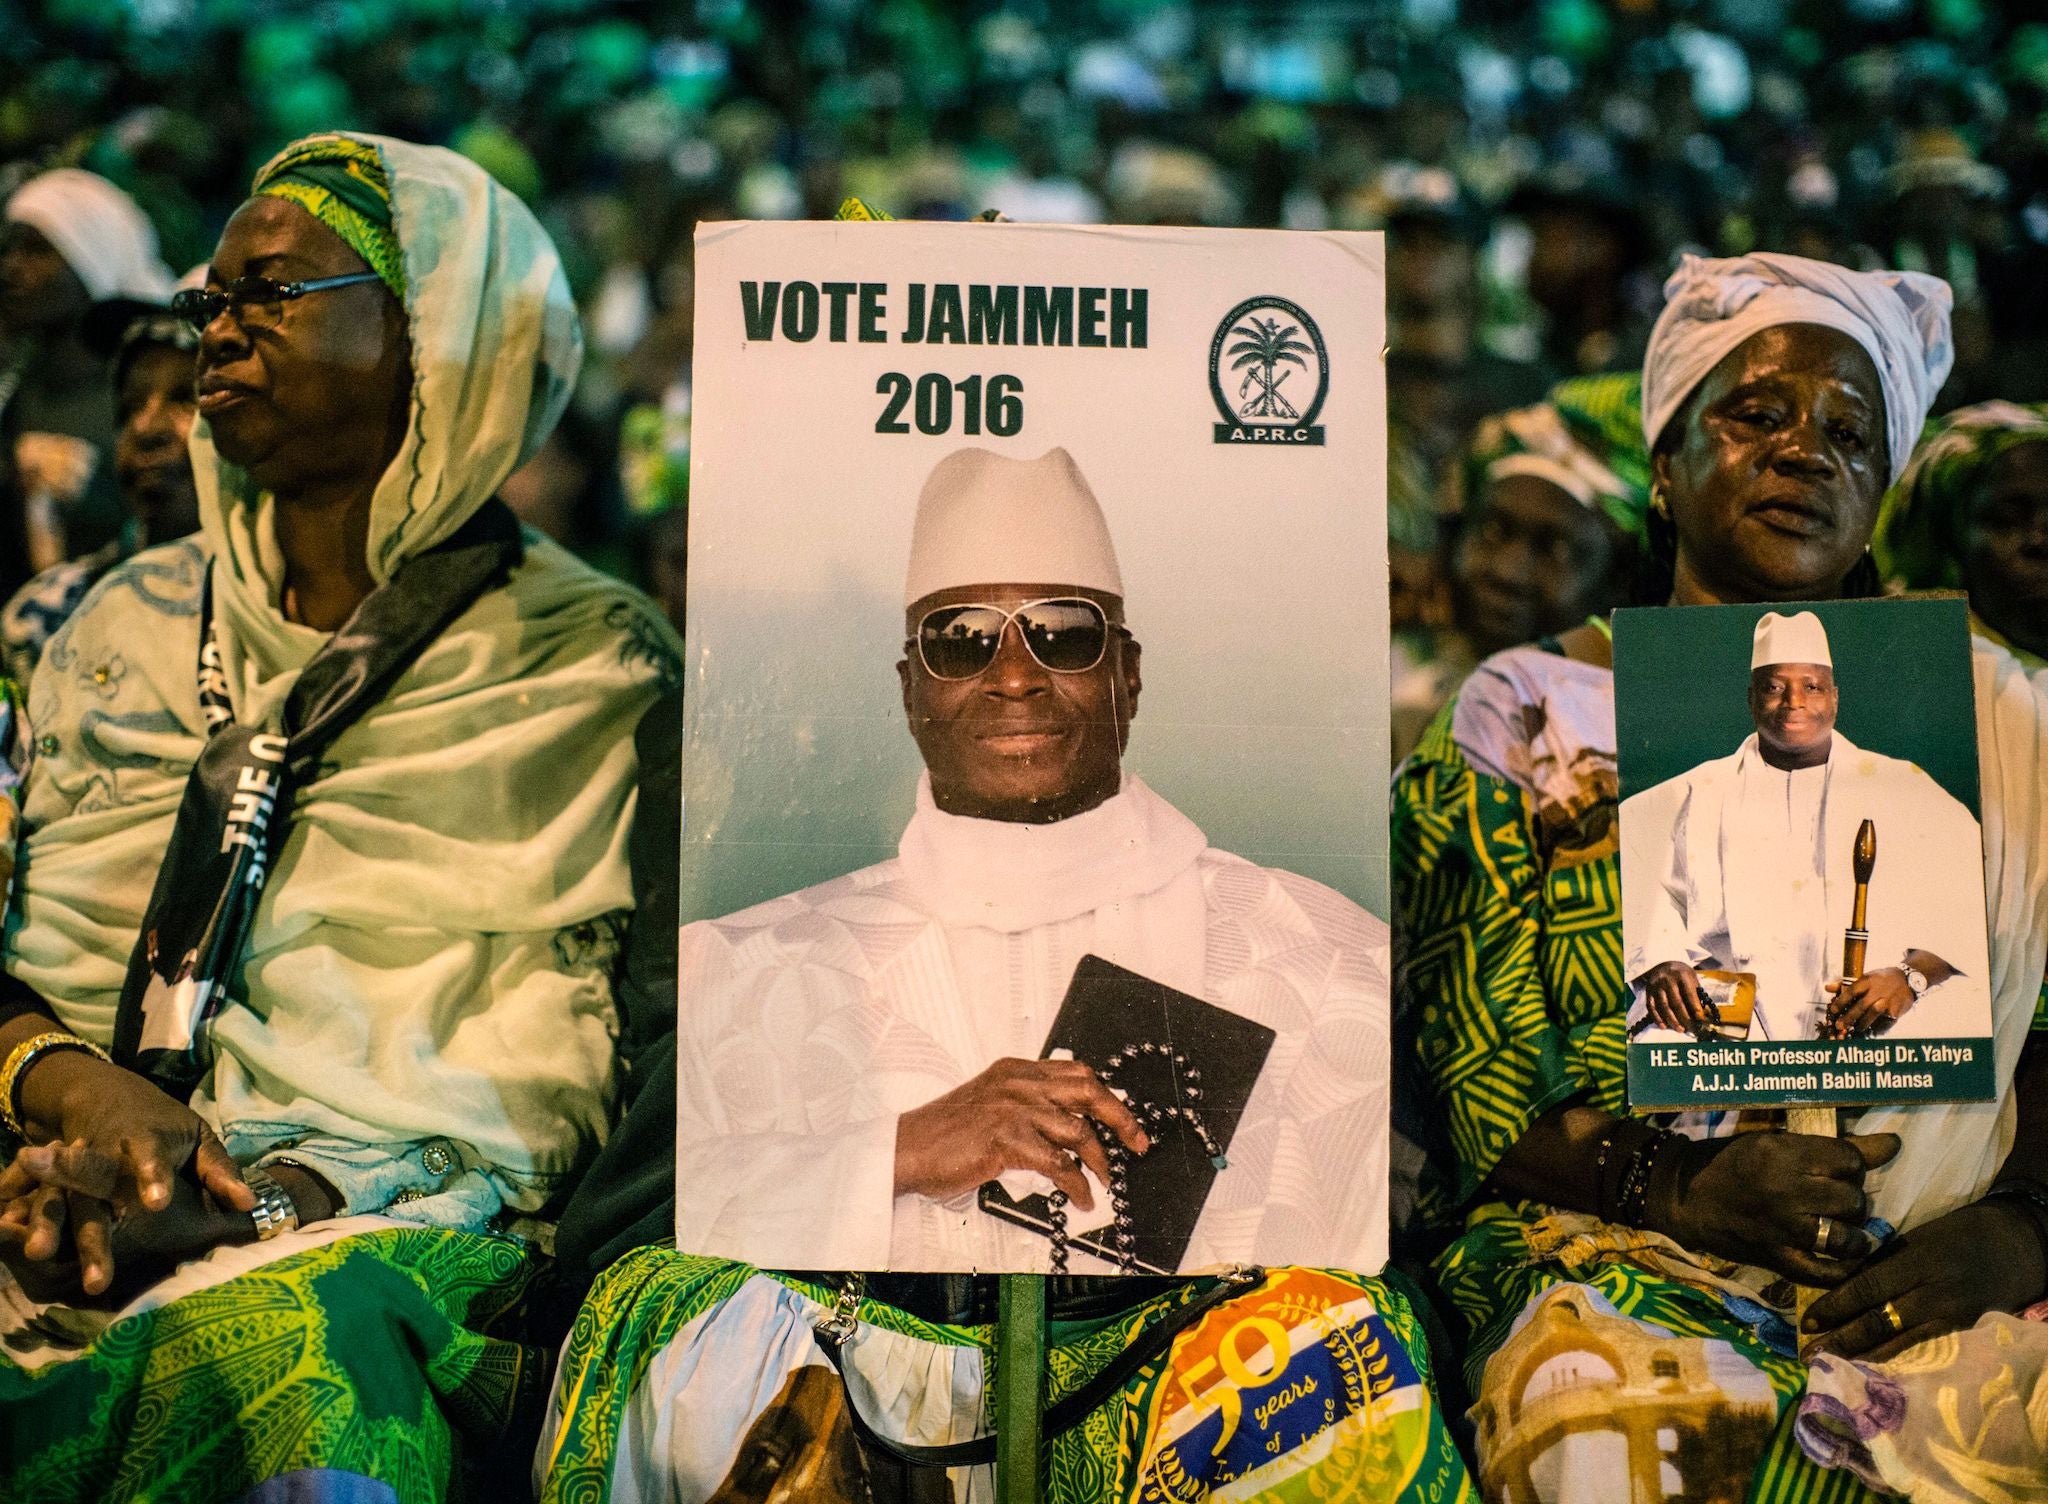 Mamadou’s father, a soldier, was part of a failed coup against Yaha Jammeh